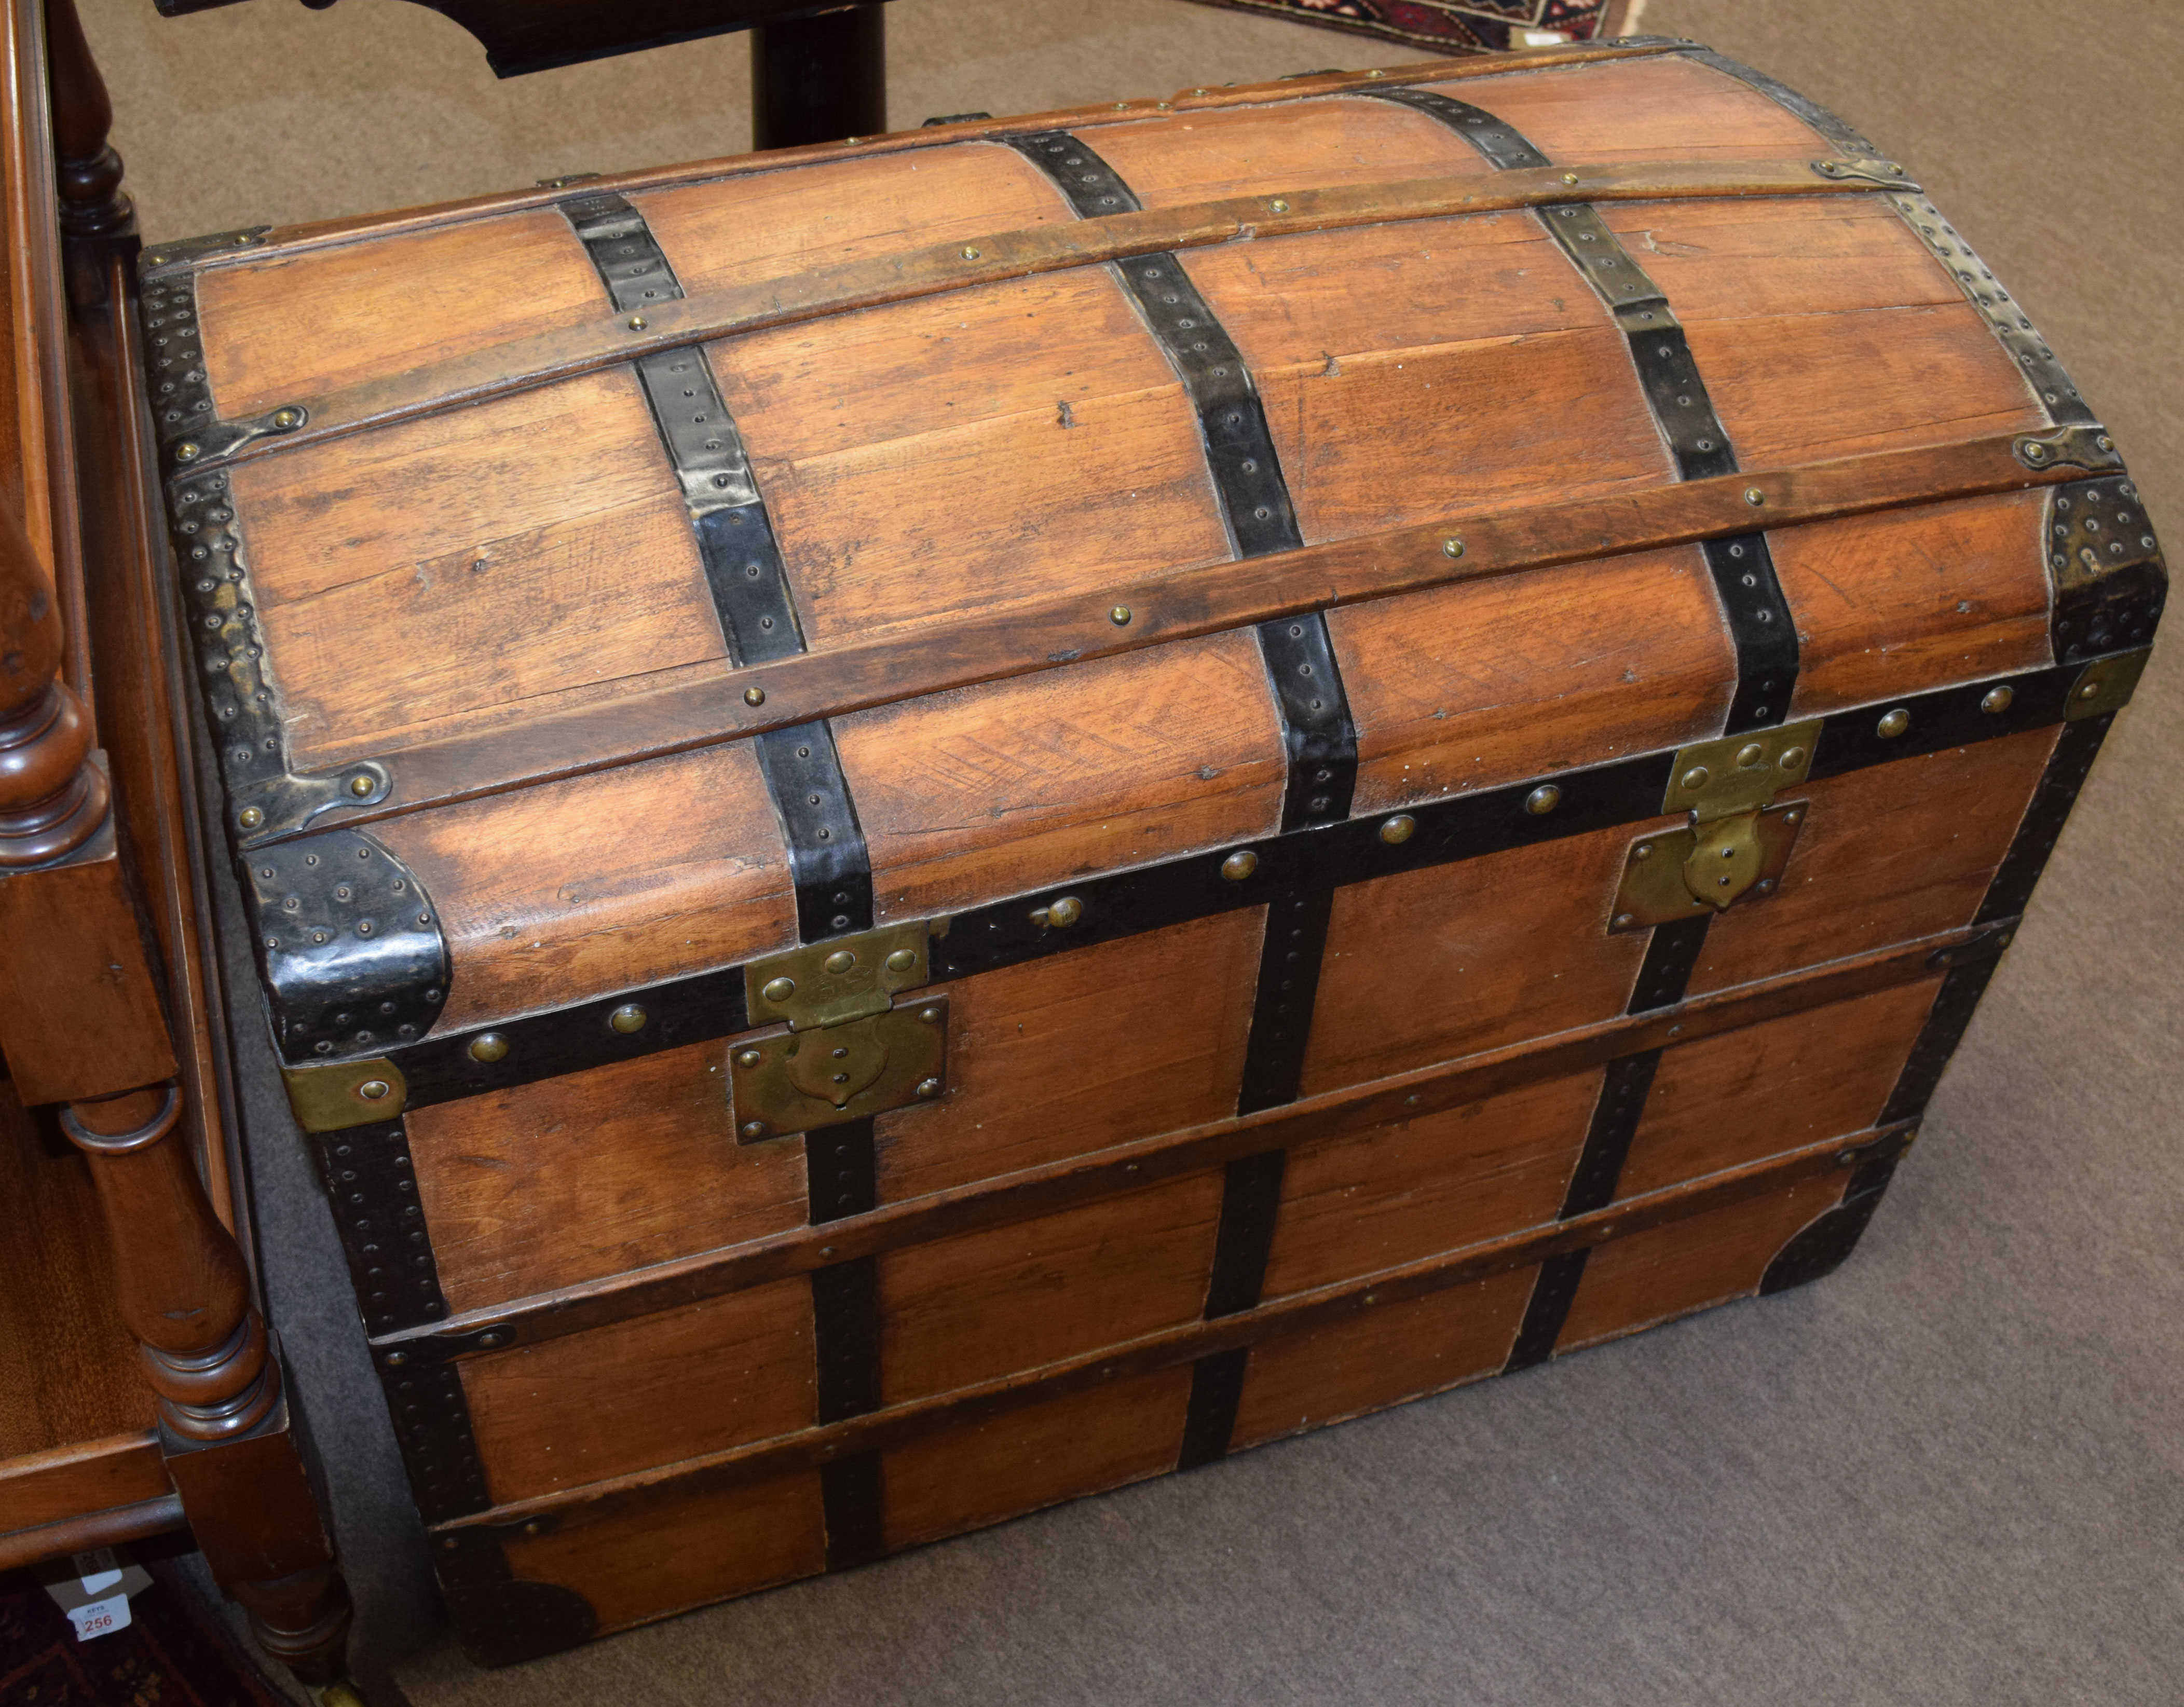 Late 19th century stained wood travelling trunk with metal and wood lath mounts to the domed lid and